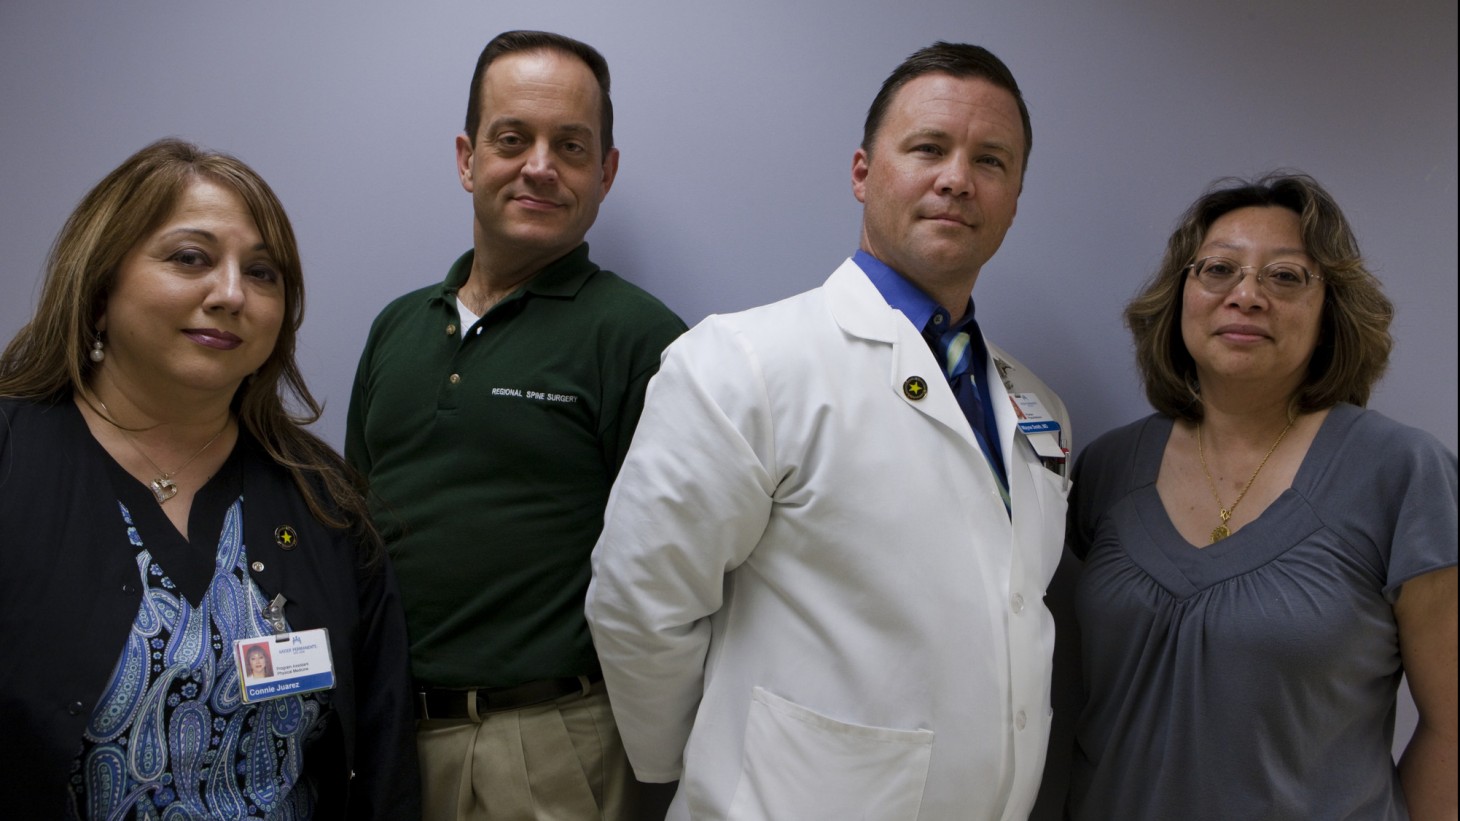 Four health care workers posing together 